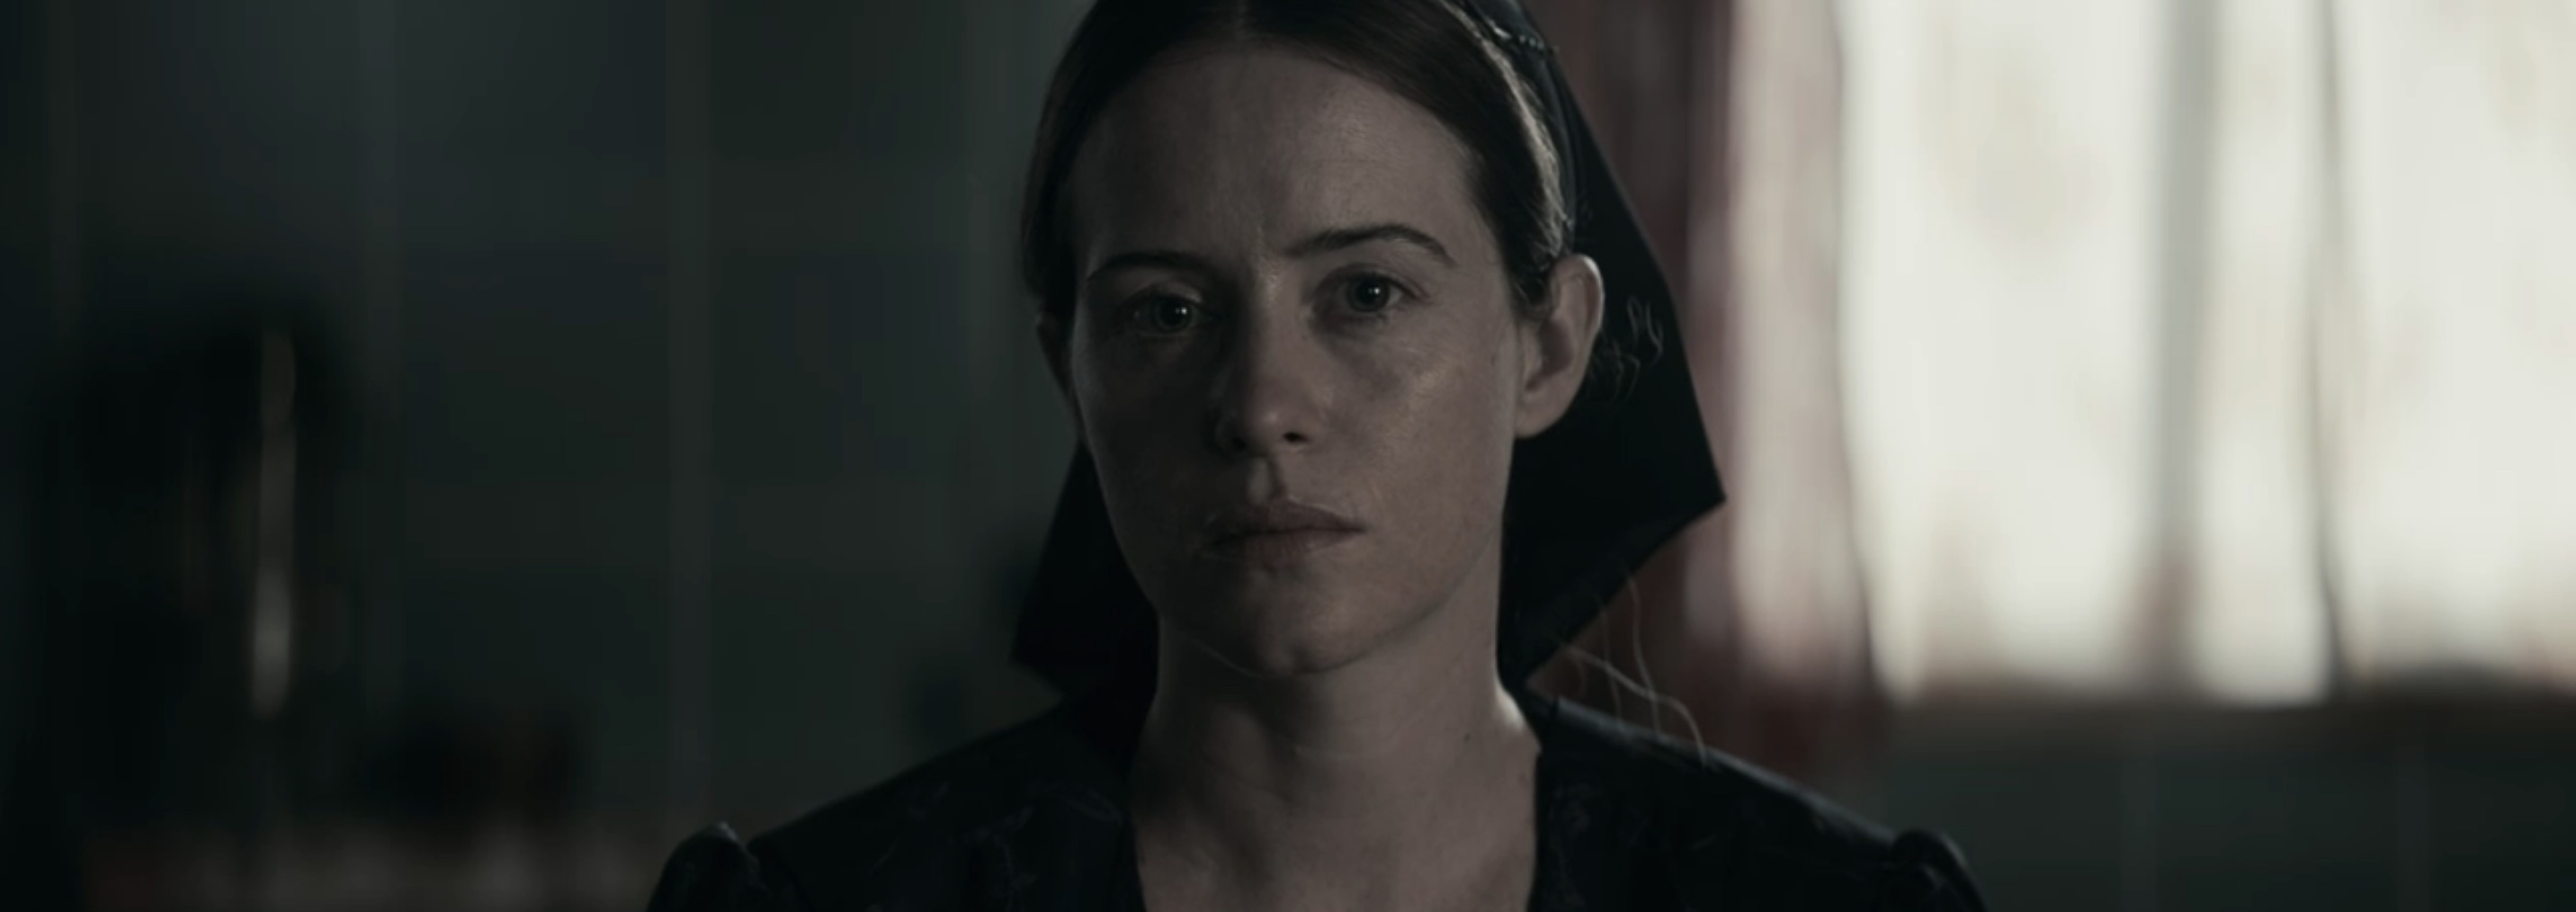 Women Talking Cast on Amazon - Claire Foy as Salome